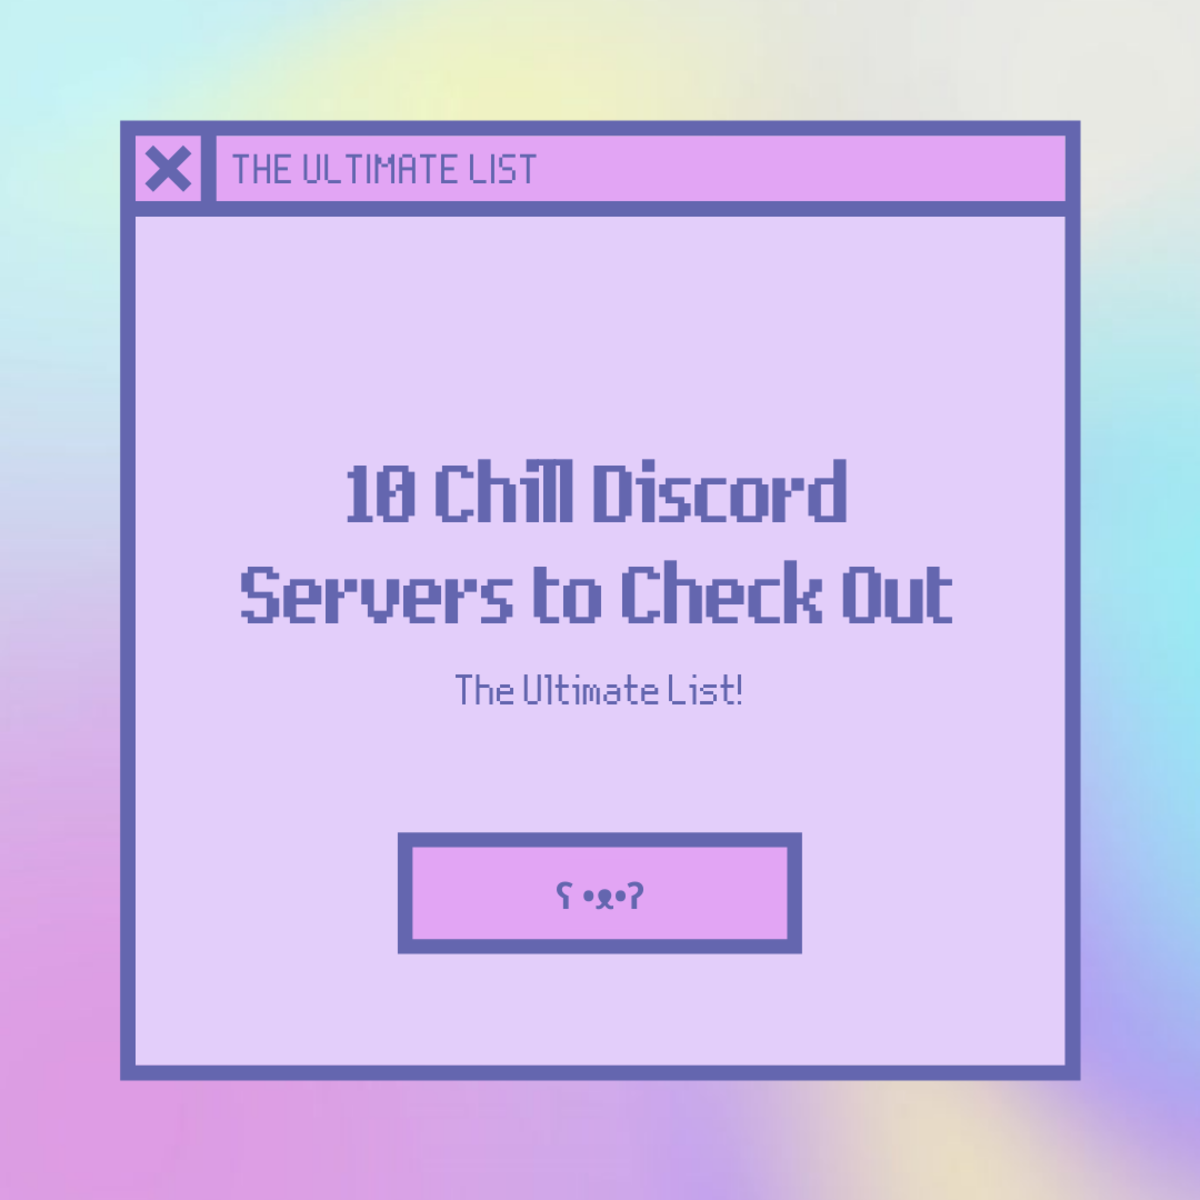 10 Chill Discord Servers to Check Out: The Ultimate List